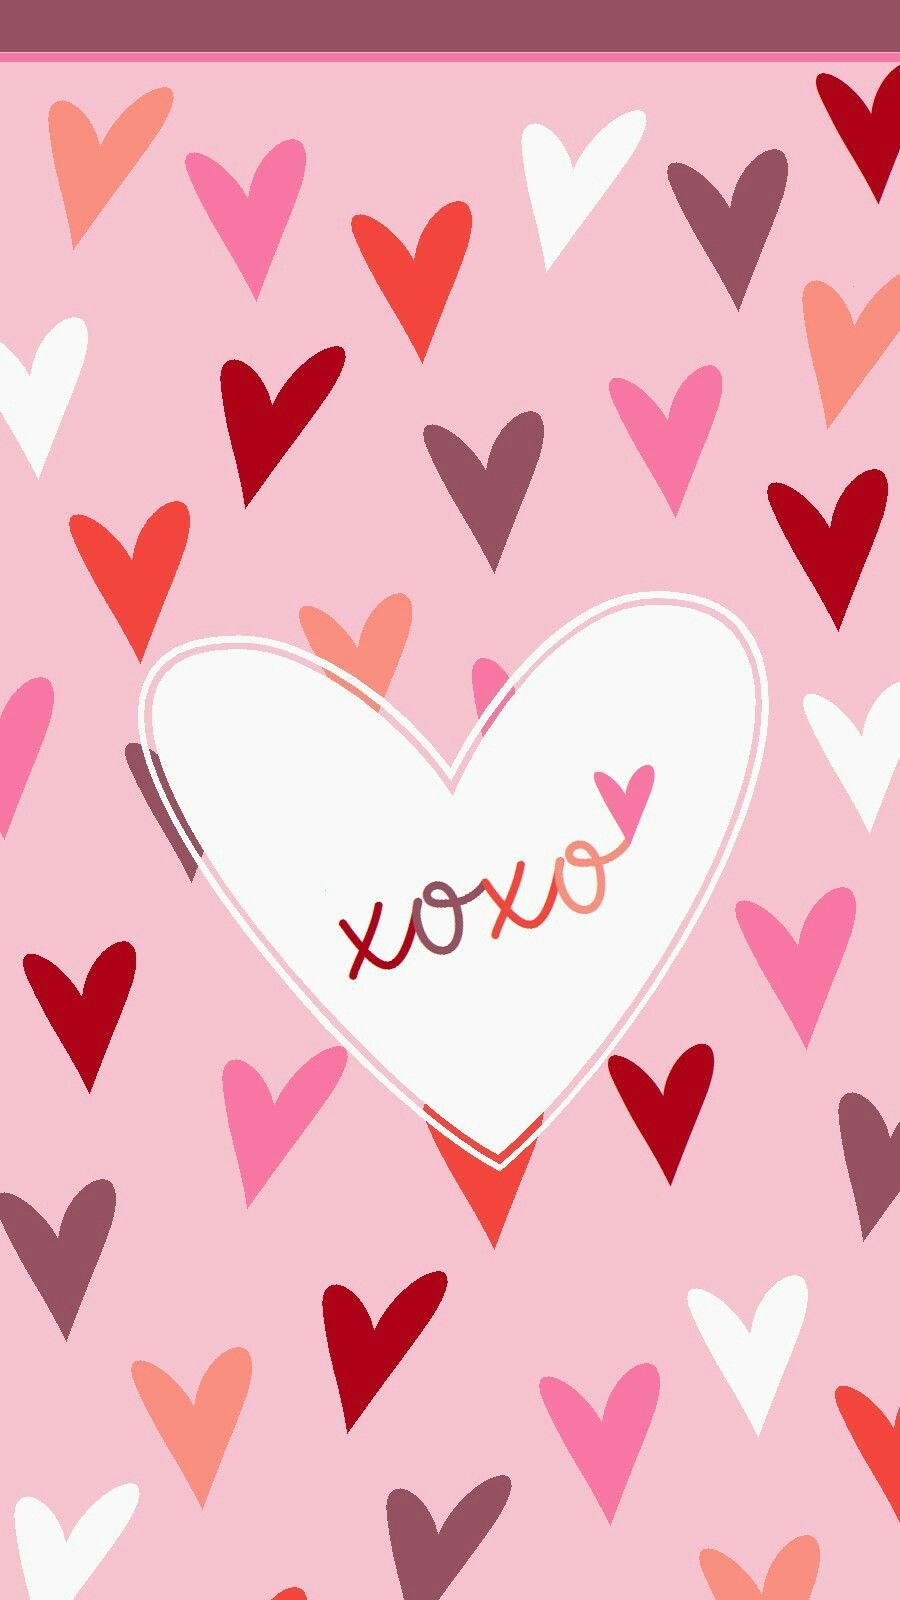 Heart iphone wallpaper, Valentines day .com